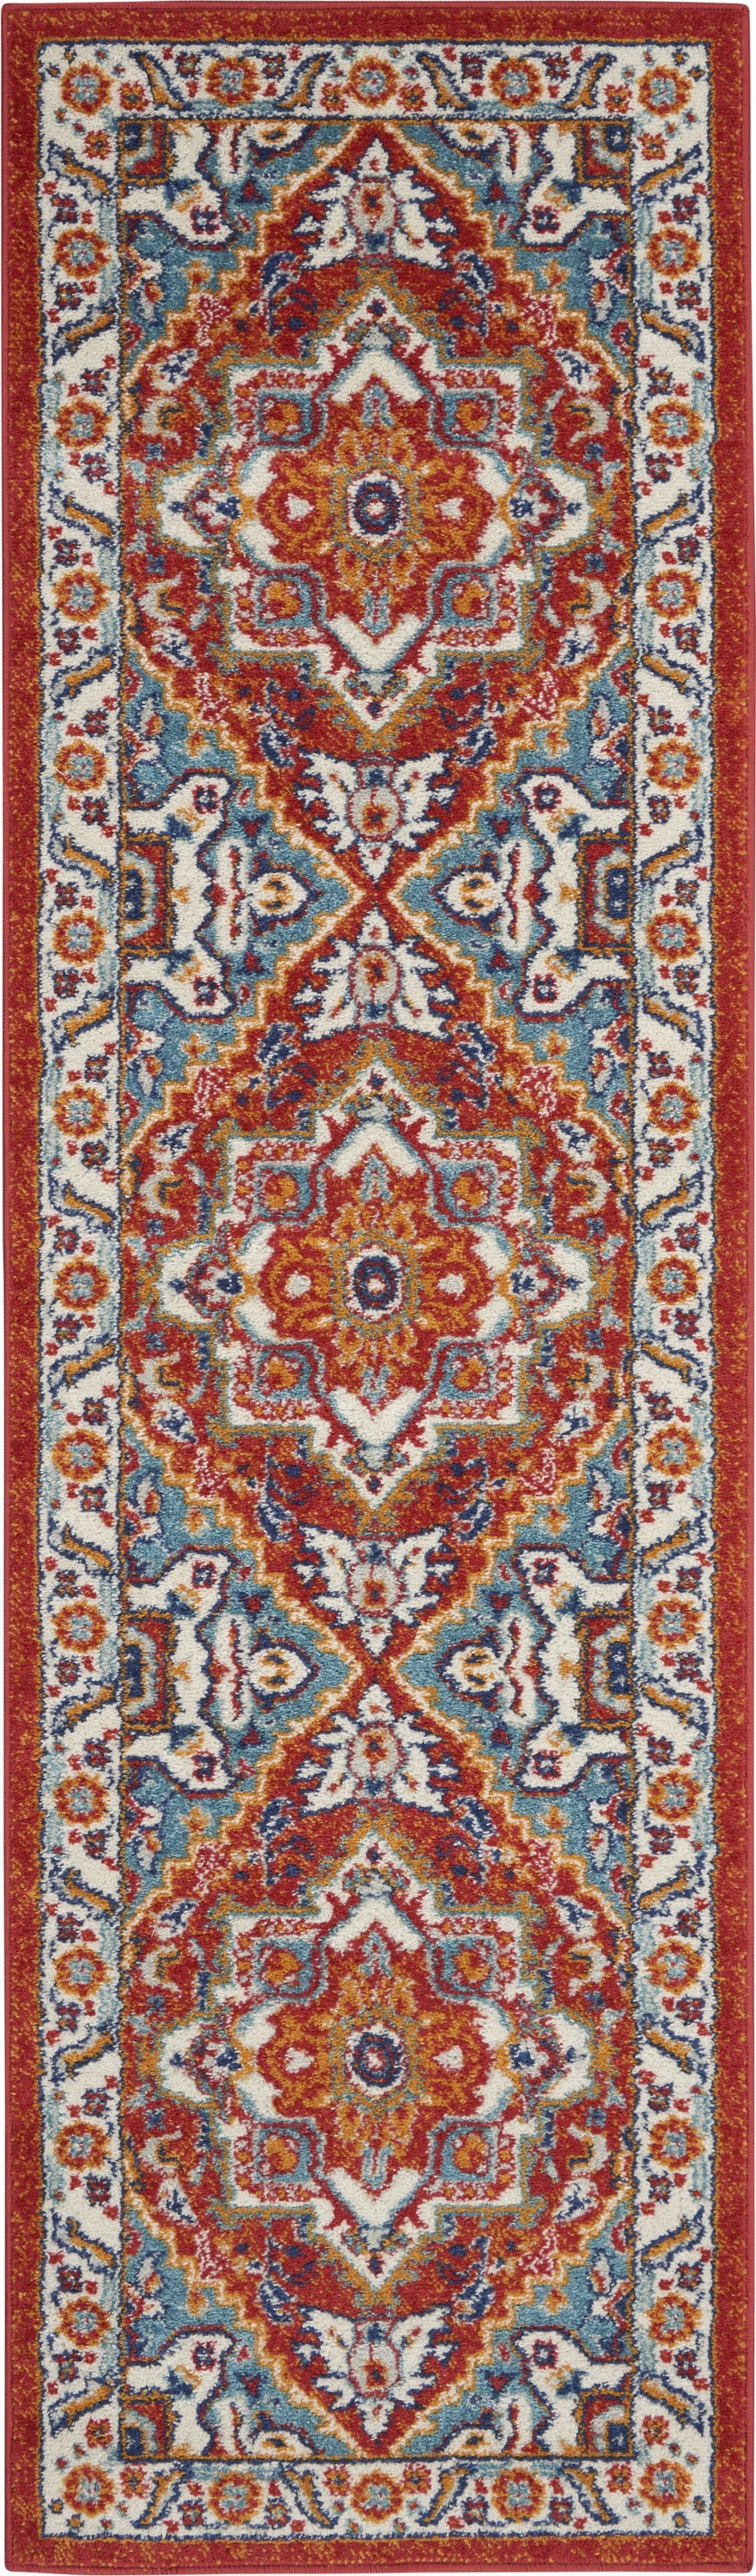 8' Red And Ivory Power Loom Runner Rug-385654-1